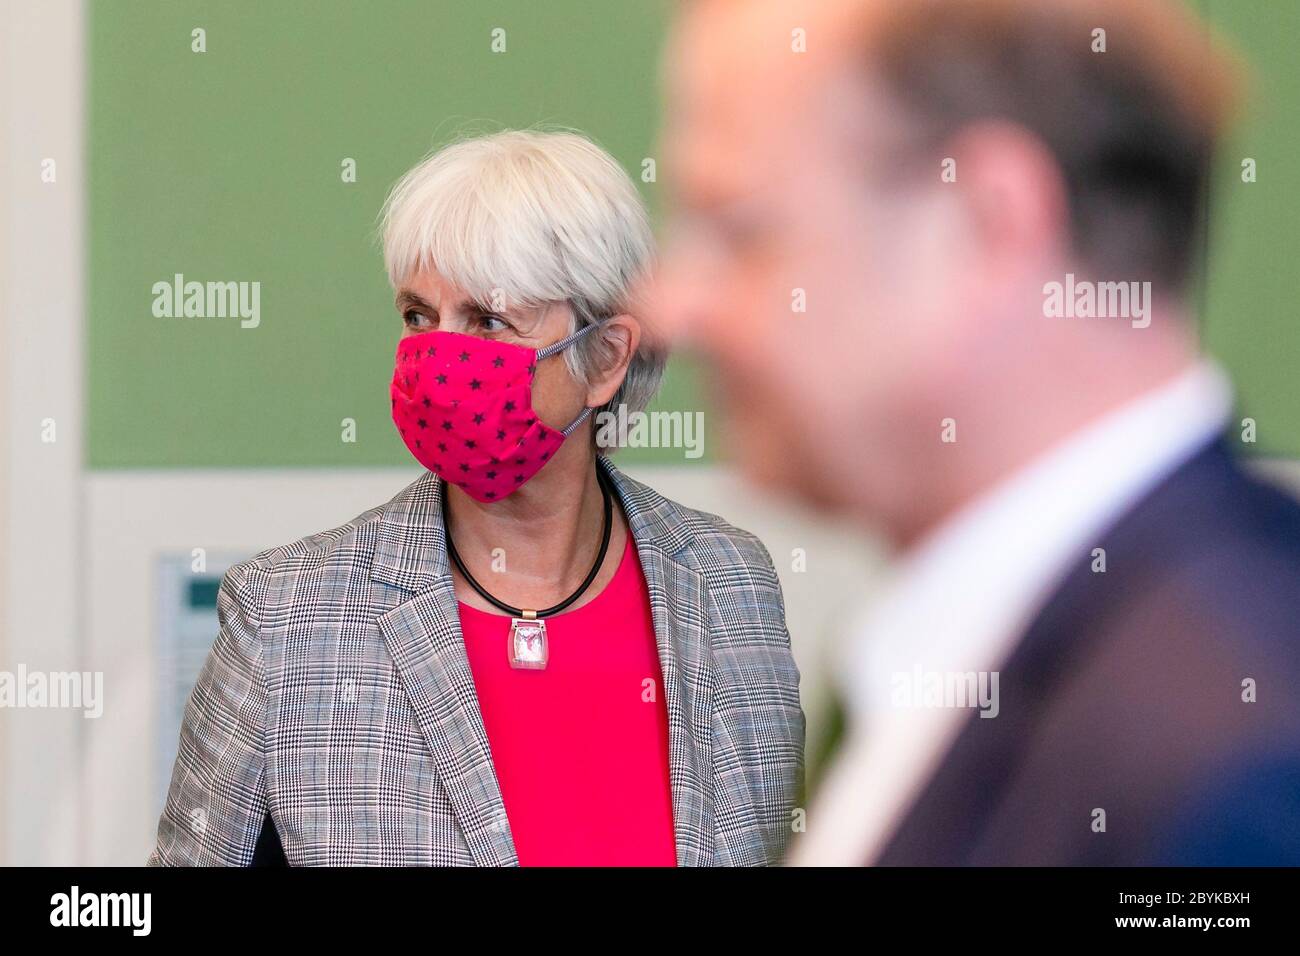 Kiel, Germany. 10th June, 2020. Ulrike Stahlmann-Liebelt, head of the public prosecutor's office in Flensburg, wears a nose-mouthpiece before a meeting of the interior and legal committee in the Kiel state parliament. The aim was to clarify why the main suspect in the case of the British girl Maddie McCann was temporarily released for about four weeks in 2008 due to a judicial breakdown at the Flensburg public prosecutor's office. The German man, who has committed multiple offences, is currently in prison in Kiel for a drug offence. Credit: Frank Molter/dpa/Alamy Live News Stock Photo